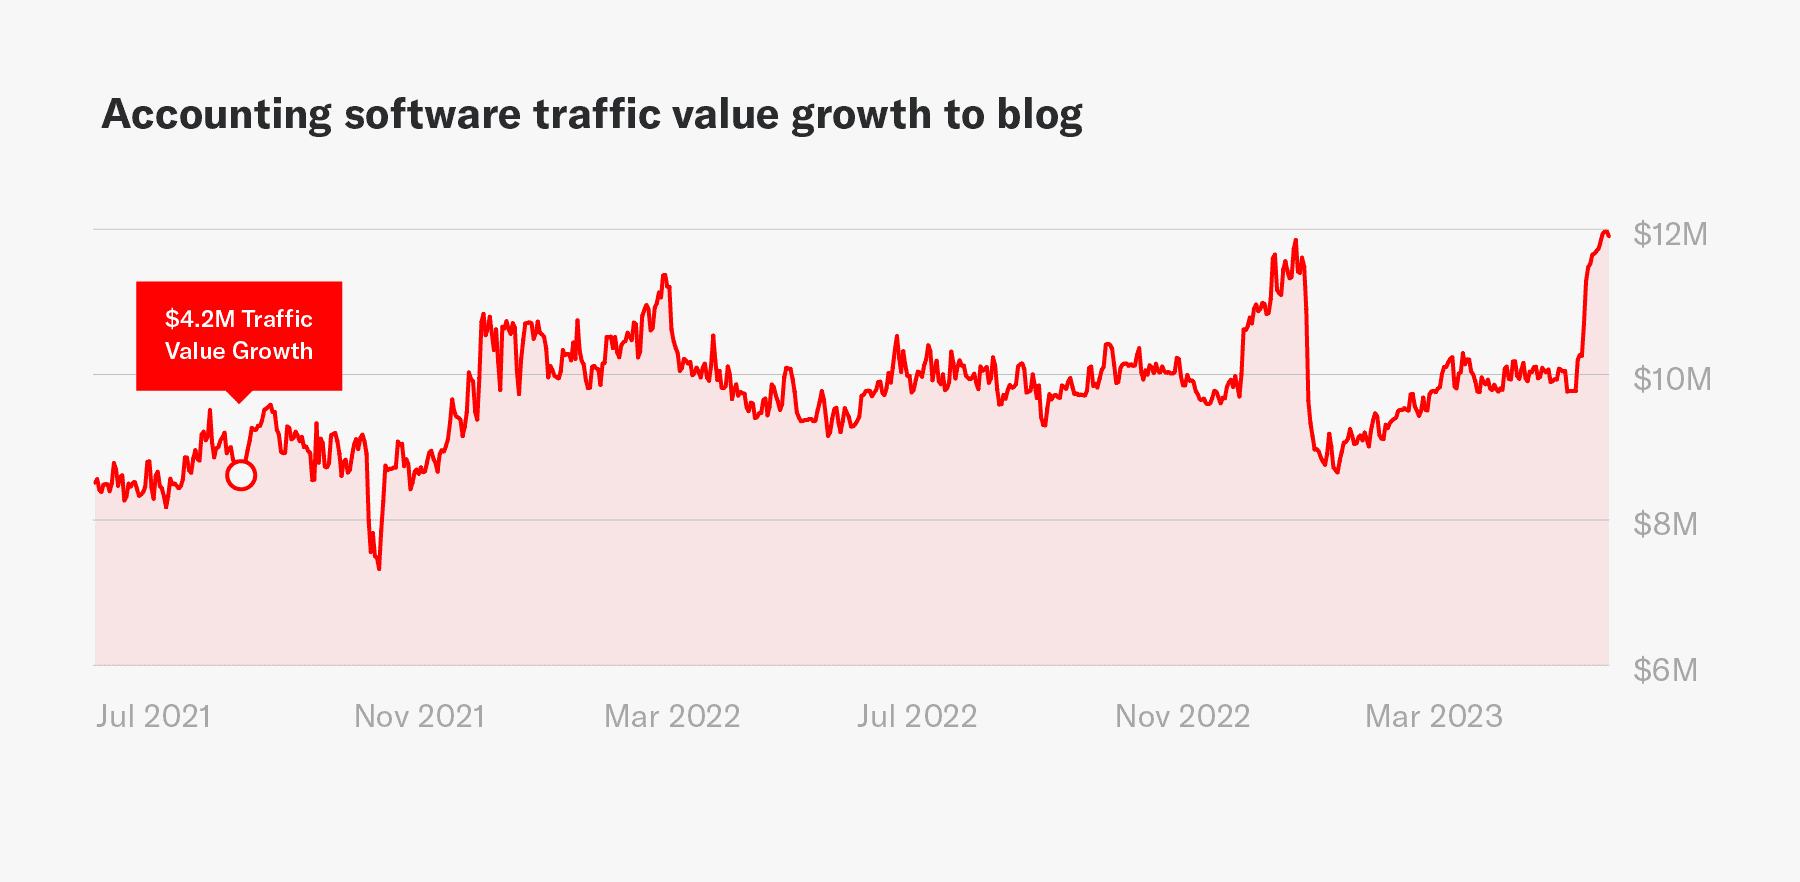 The impact of Siege Media on accounting software company traffic value growth